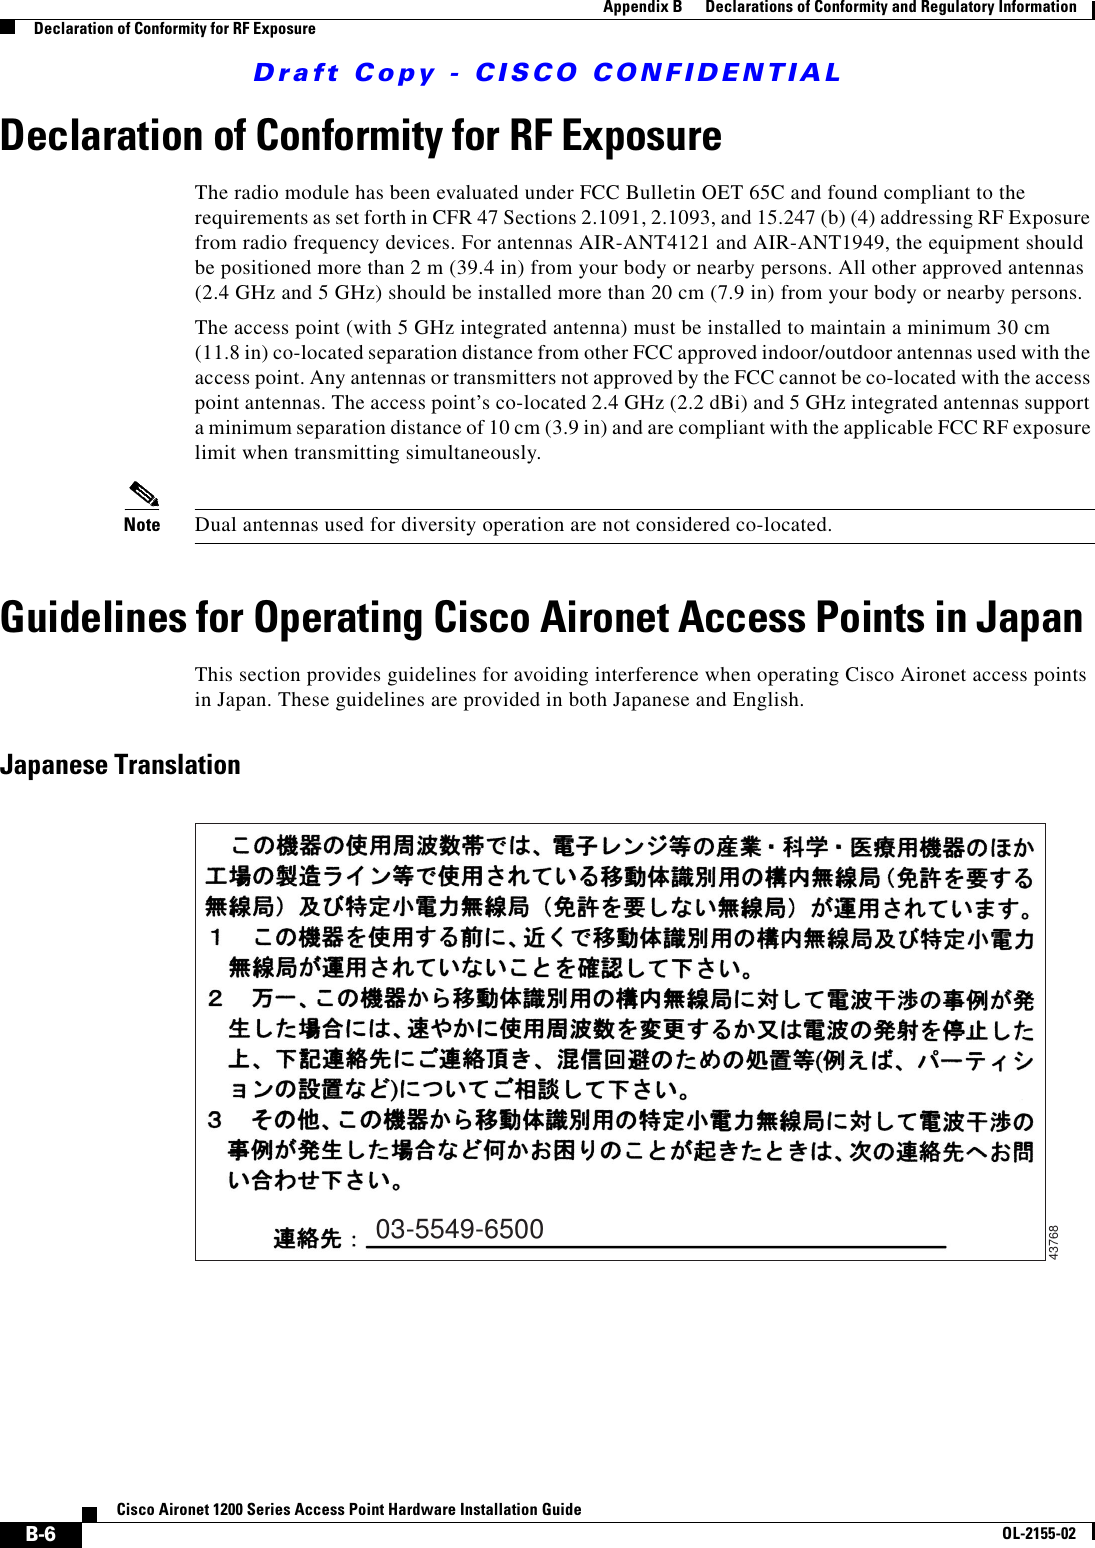 Draft Copy - CISCO CONFIDENTIAL B-6Cisco Aironet 1200 Series Access Point Hardware Installation GuideOL-2155-02Appendix B      Declarations of Conformity and Regulatory InformationDeclaration of Conformity for RF ExposureDeclaration of Conformity for RF ExposureThe radio module has been evaluated under FCC Bulletin OET 65C and found compliant to the requirements as set forth in CFR 47 Sections 2.1091, 2.1093, and 15.247 (b) (4) addressing RF Exposure from radio frequency devices. For antennas AIR-ANT4121 and AIR-ANT1949, the equipment should be positioned more than 2 m (39.4 in) from your body or nearby persons. All other approved antennas (2.4 GHz and 5 GHz) should be installed more than 20 cm (7.9 in) from your body or nearby persons.The access point (with 5 GHz integrated antenna) must be installed to maintain a minimum 30 cm(11.8 in) co-located separation distance from other FCC approved indoor/outdoor antennas used with the access point. Any antennas or transmitters not approved by the FCC cannot be co-located with the access point antennas. The access point’s co-located 2.4 GHz (2.2 dBi) and 5 GHz integrated antennas support a minimum separation distance of 10 cm (3.9 in) and are compliant with the applicable FCC RF exposure limit when transmitting simultaneously.Note Dual antennas used for diversity operation are not considered co-located.Guidelines for Operating Cisco Aironet Access Points in JapanThis section provides guidelines for avoiding interference when operating Cisco Aironet access points in Japan. These guidelines are provided in both Japanese and English.Japanese Translation03-5549-650043768